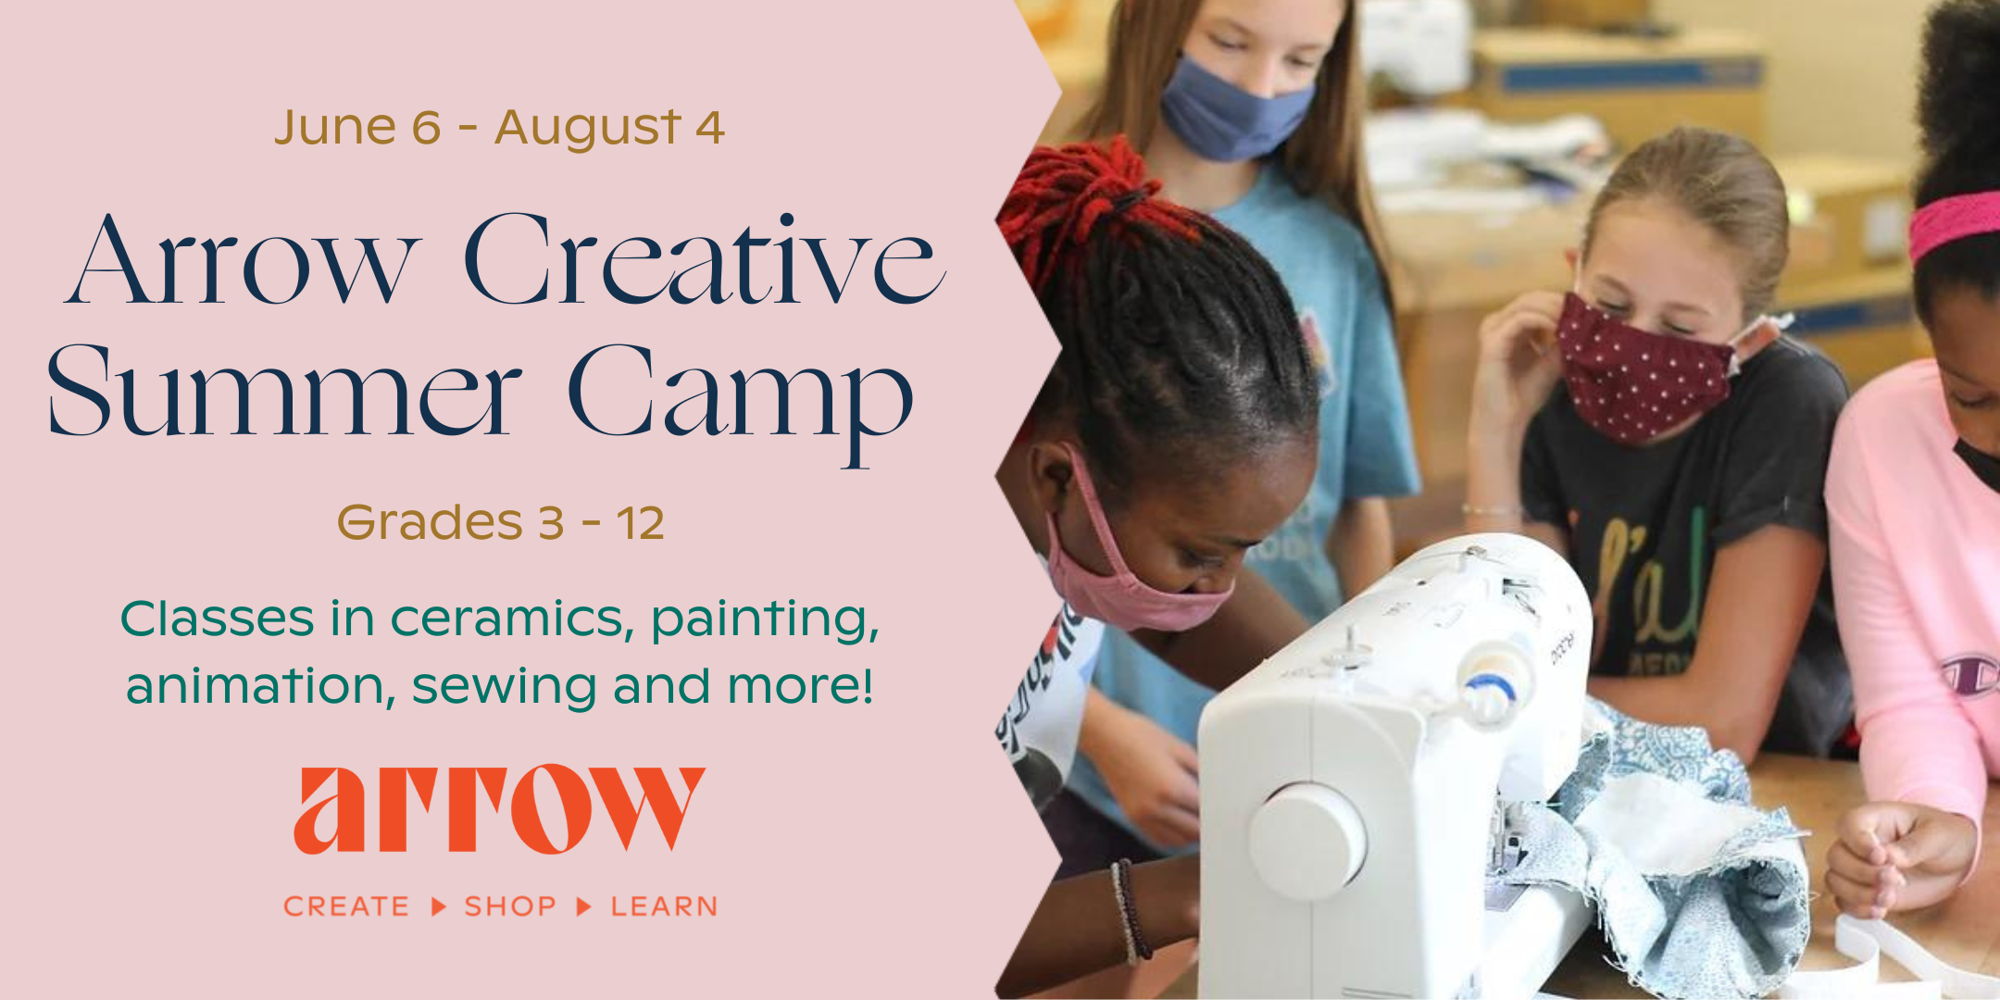 Summer Camp at Arrow Creative promotional image